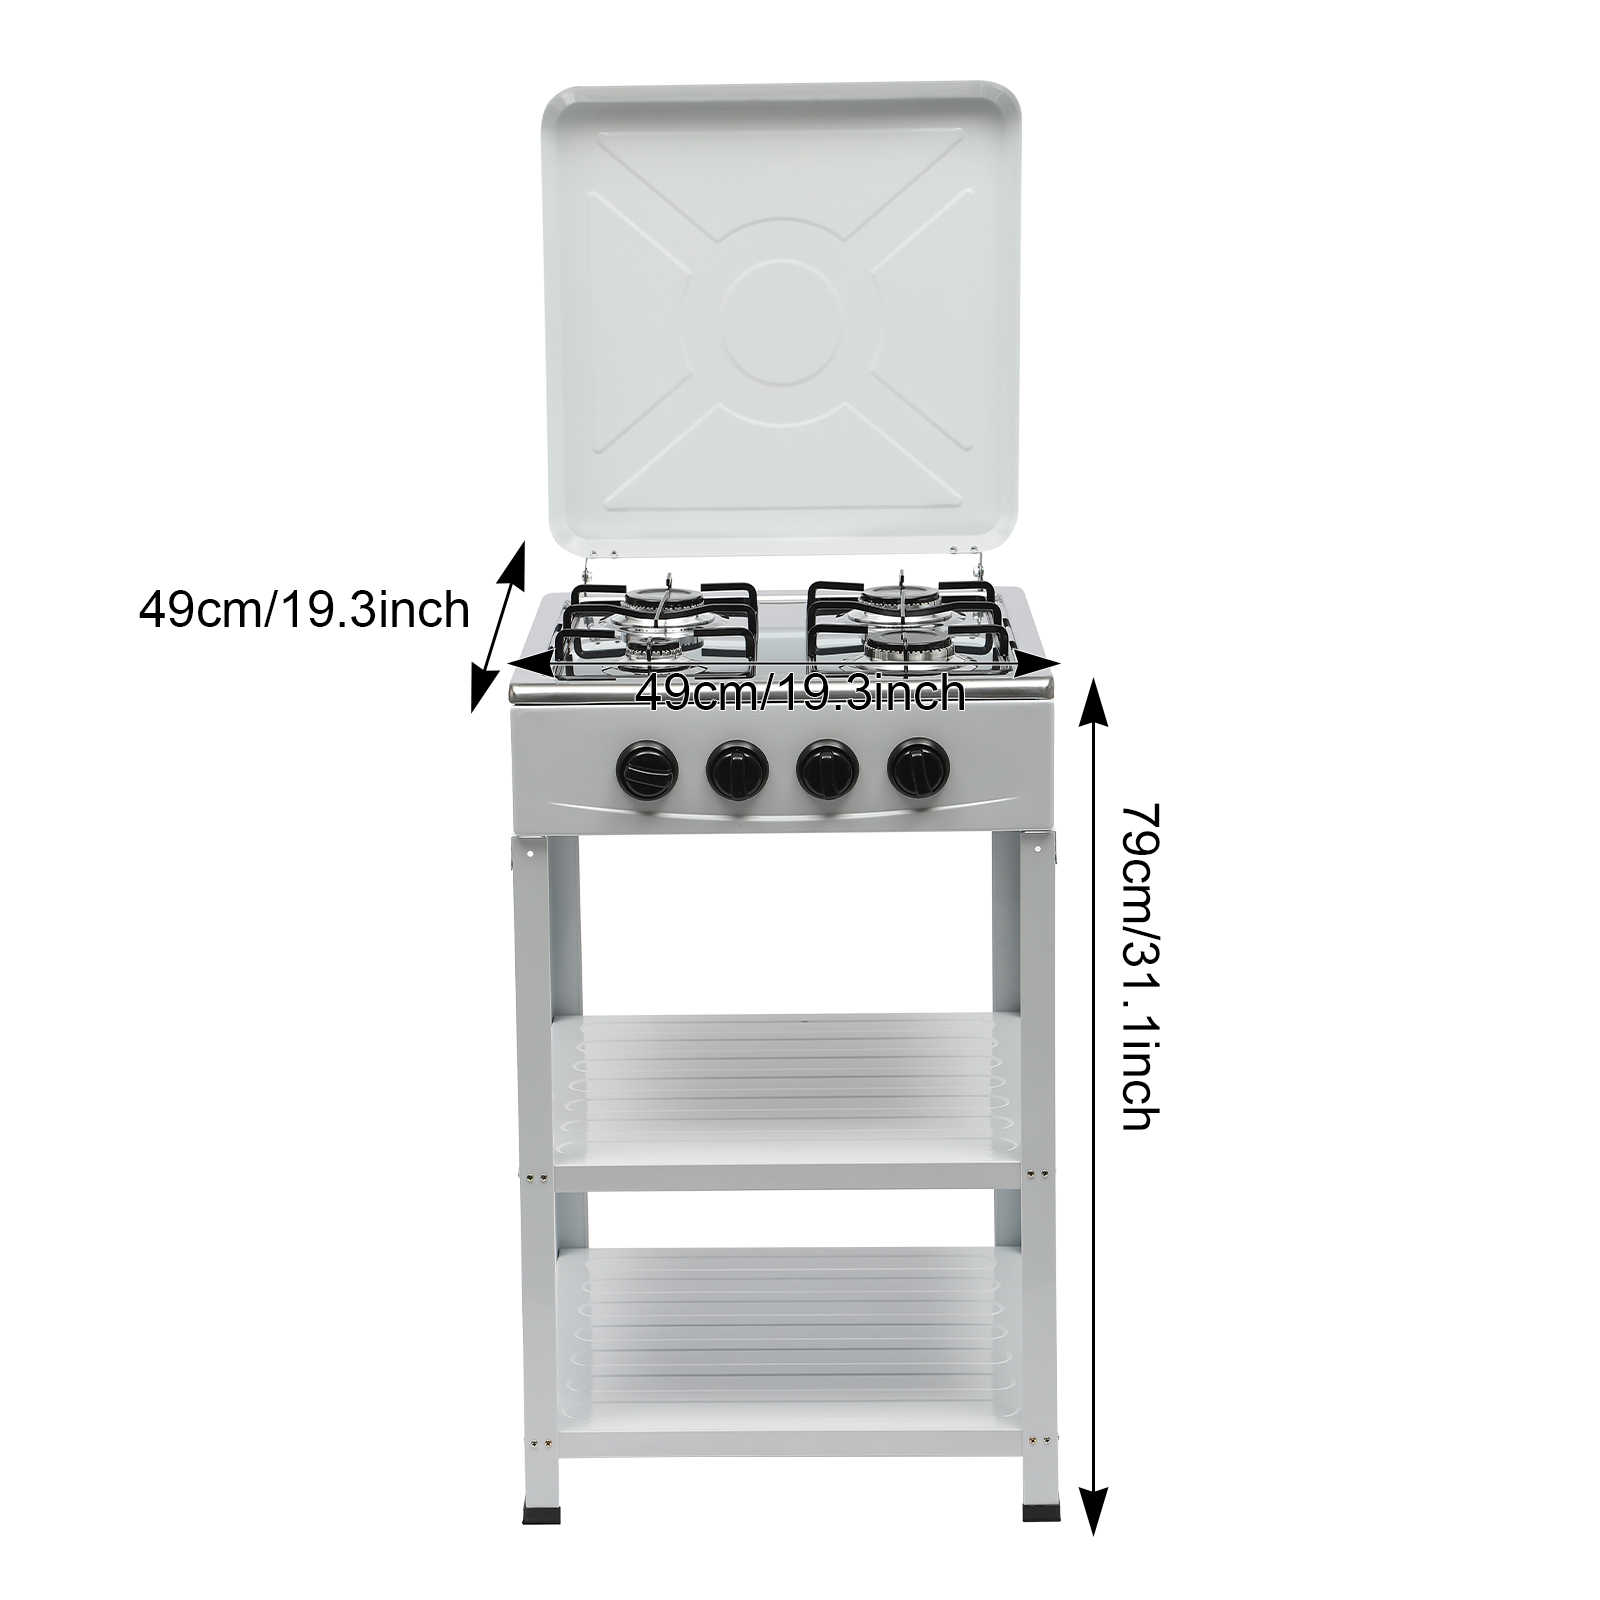 Oukaning 4 Burner Gas Stove with Support Leg Stand and Wind Blocking Cover Camping Stove for RV, Home ,Outdoor Cooking (White) - image 3 of 13